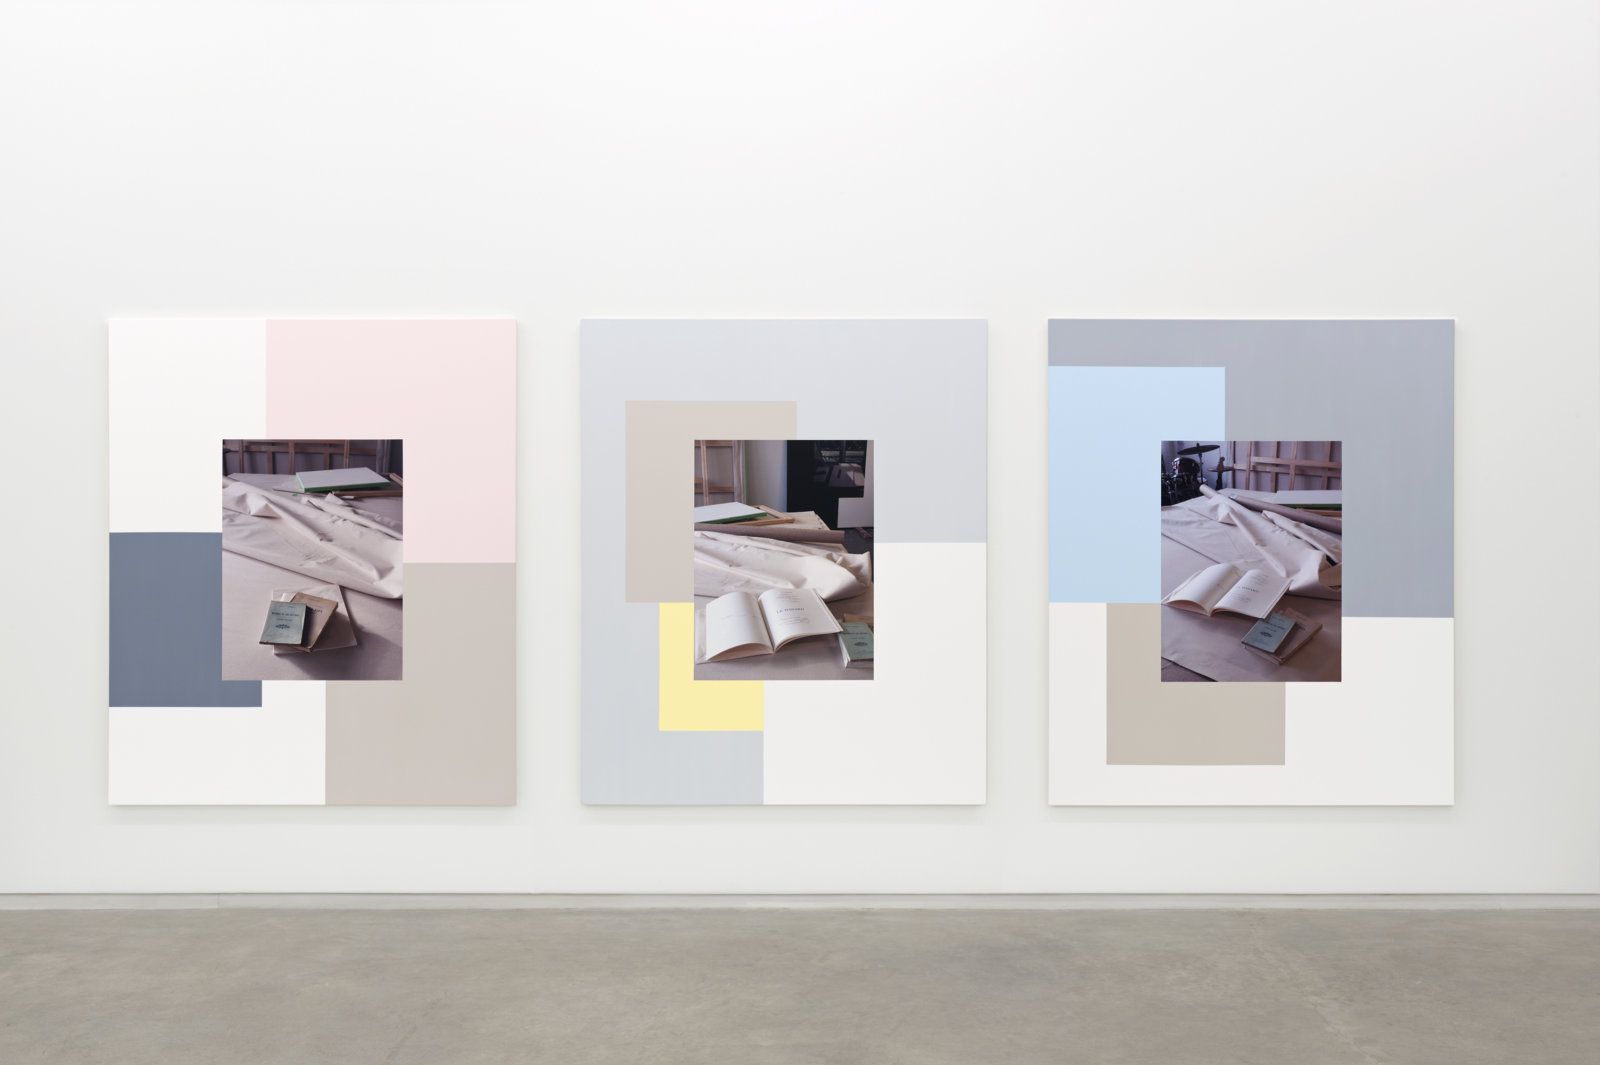 Ian Wallace, Table with Un Coup de Des I, II, III, 2011, 3 photolaminate with acrylic on canvas, each 72 x 60 in. (183 x 152 cm)